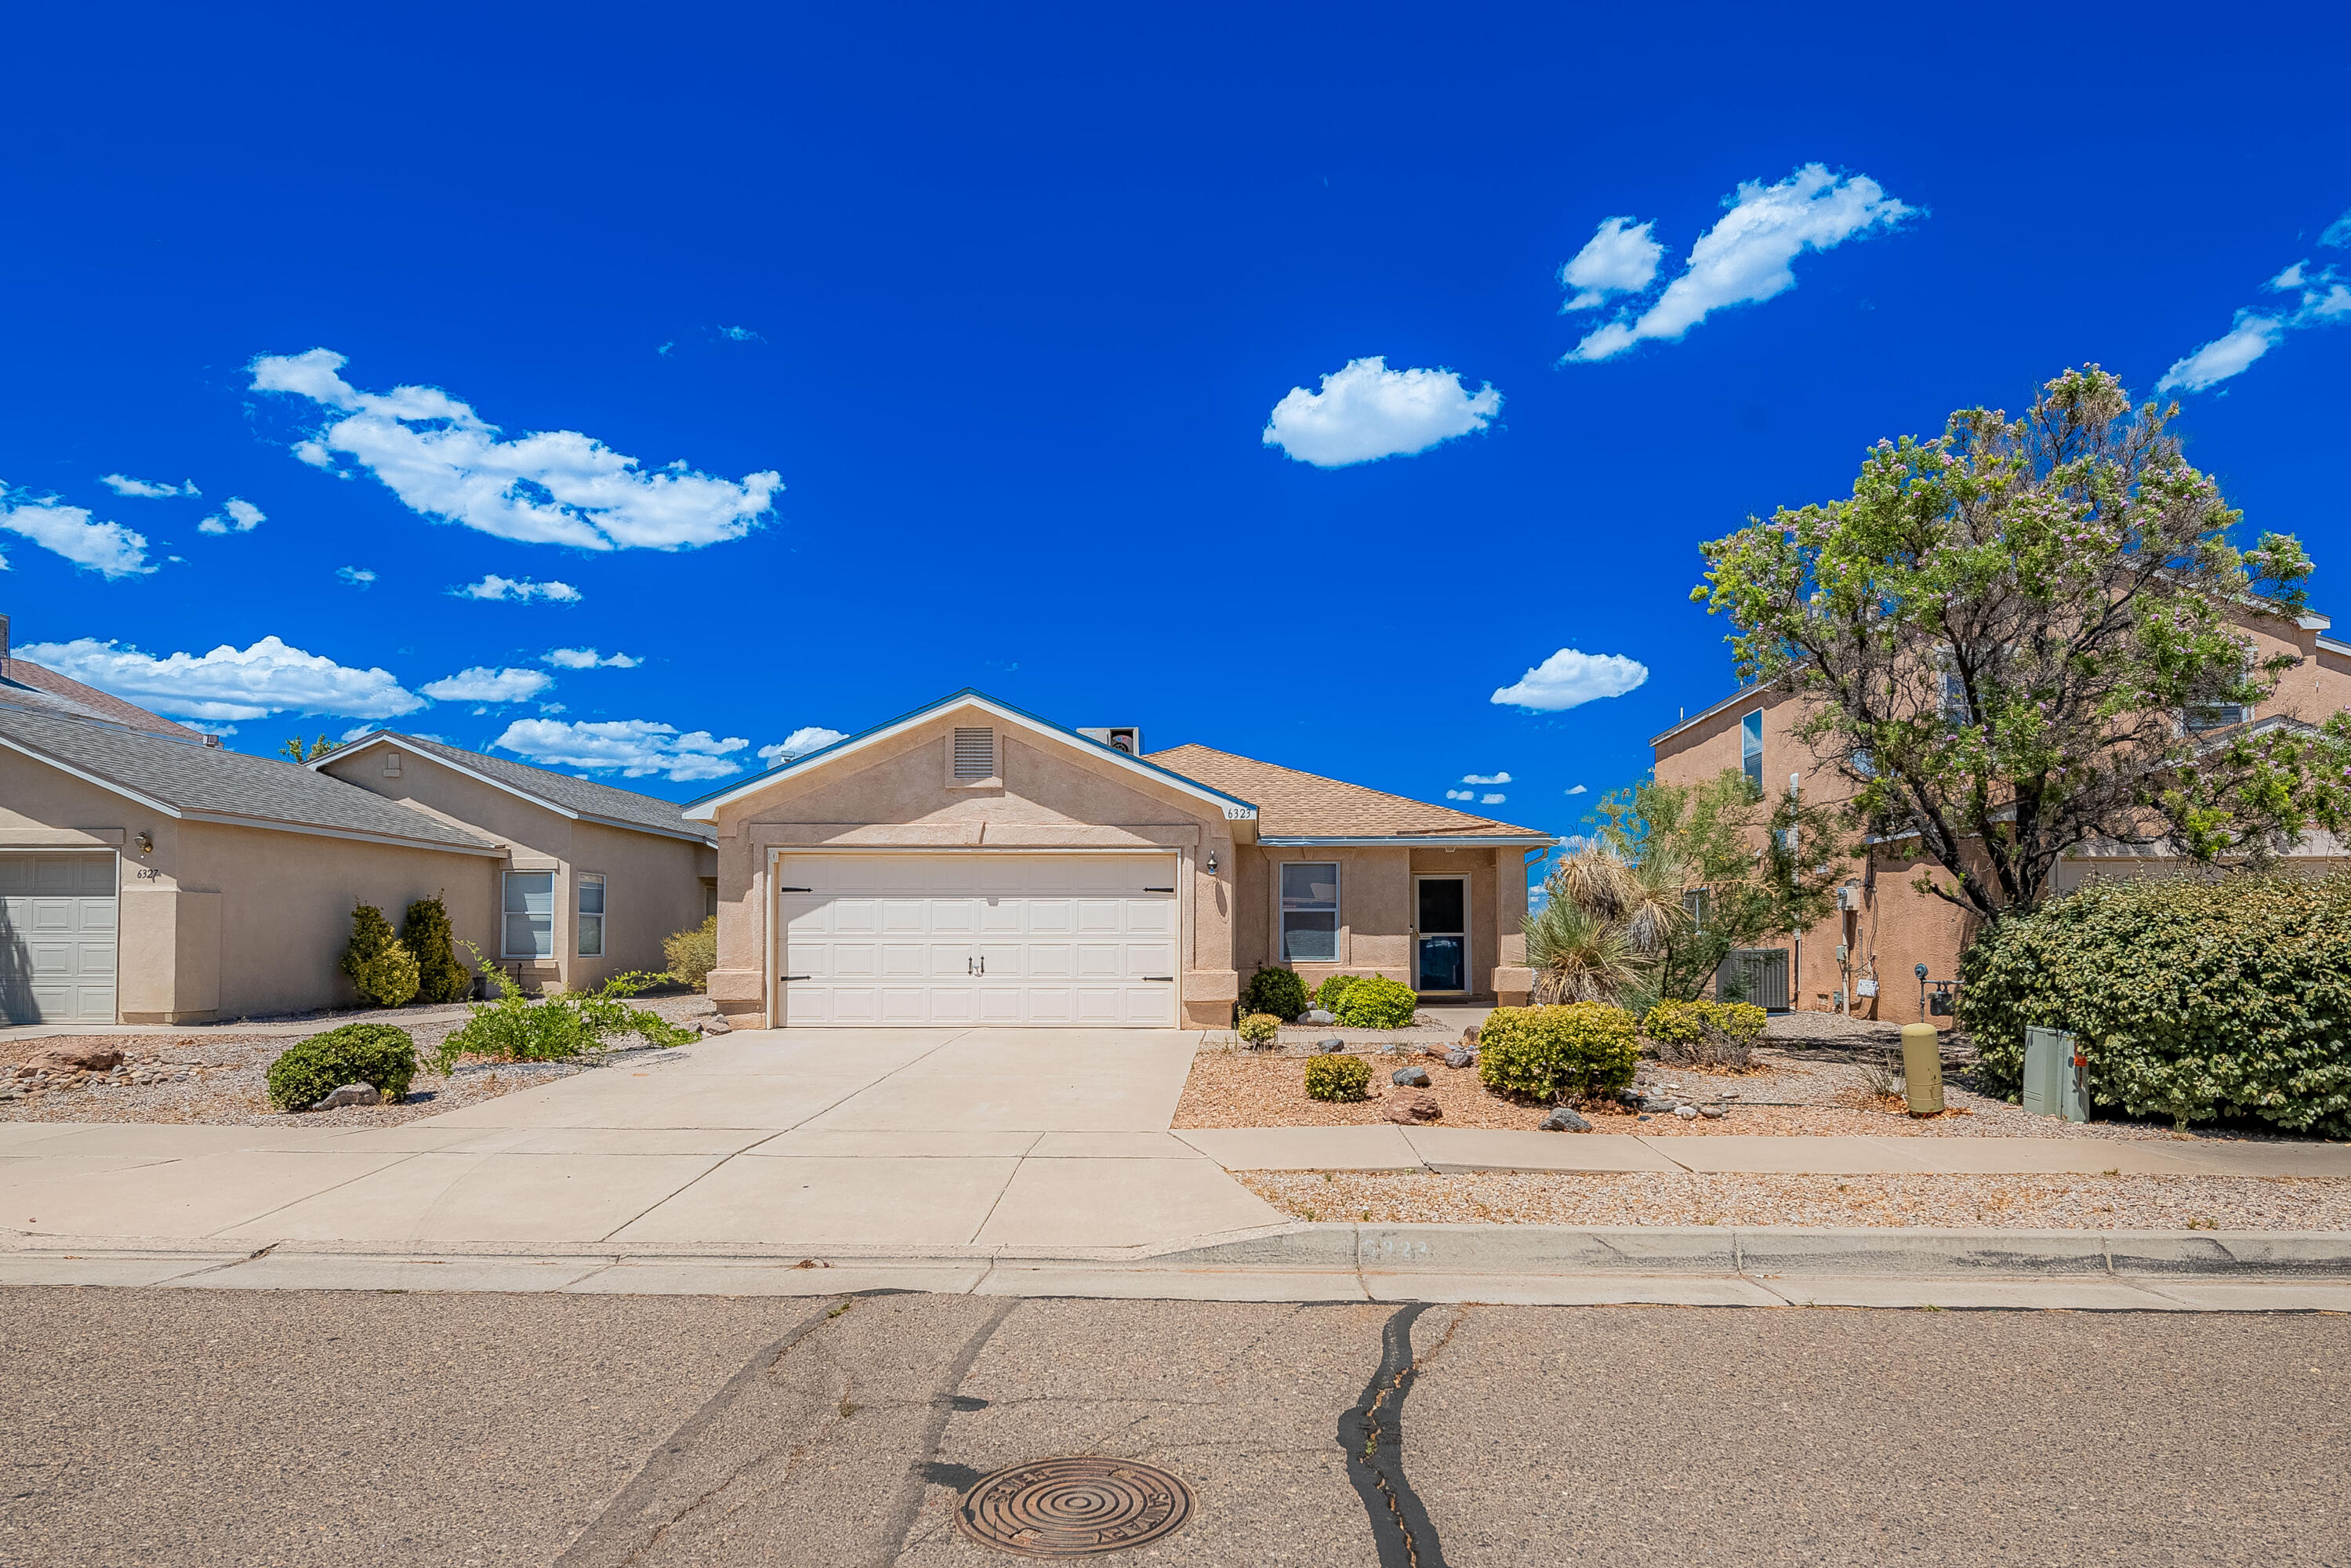 Welcome to this adorable property, located within the desirable Sedona subdivision in Ventana Ranch. This 3 bed 2 bath home is ready for new owners and is close to everything you could need! Additional perks include; bright, open kitchen,  2 car garage and an easy maintenance backyard.